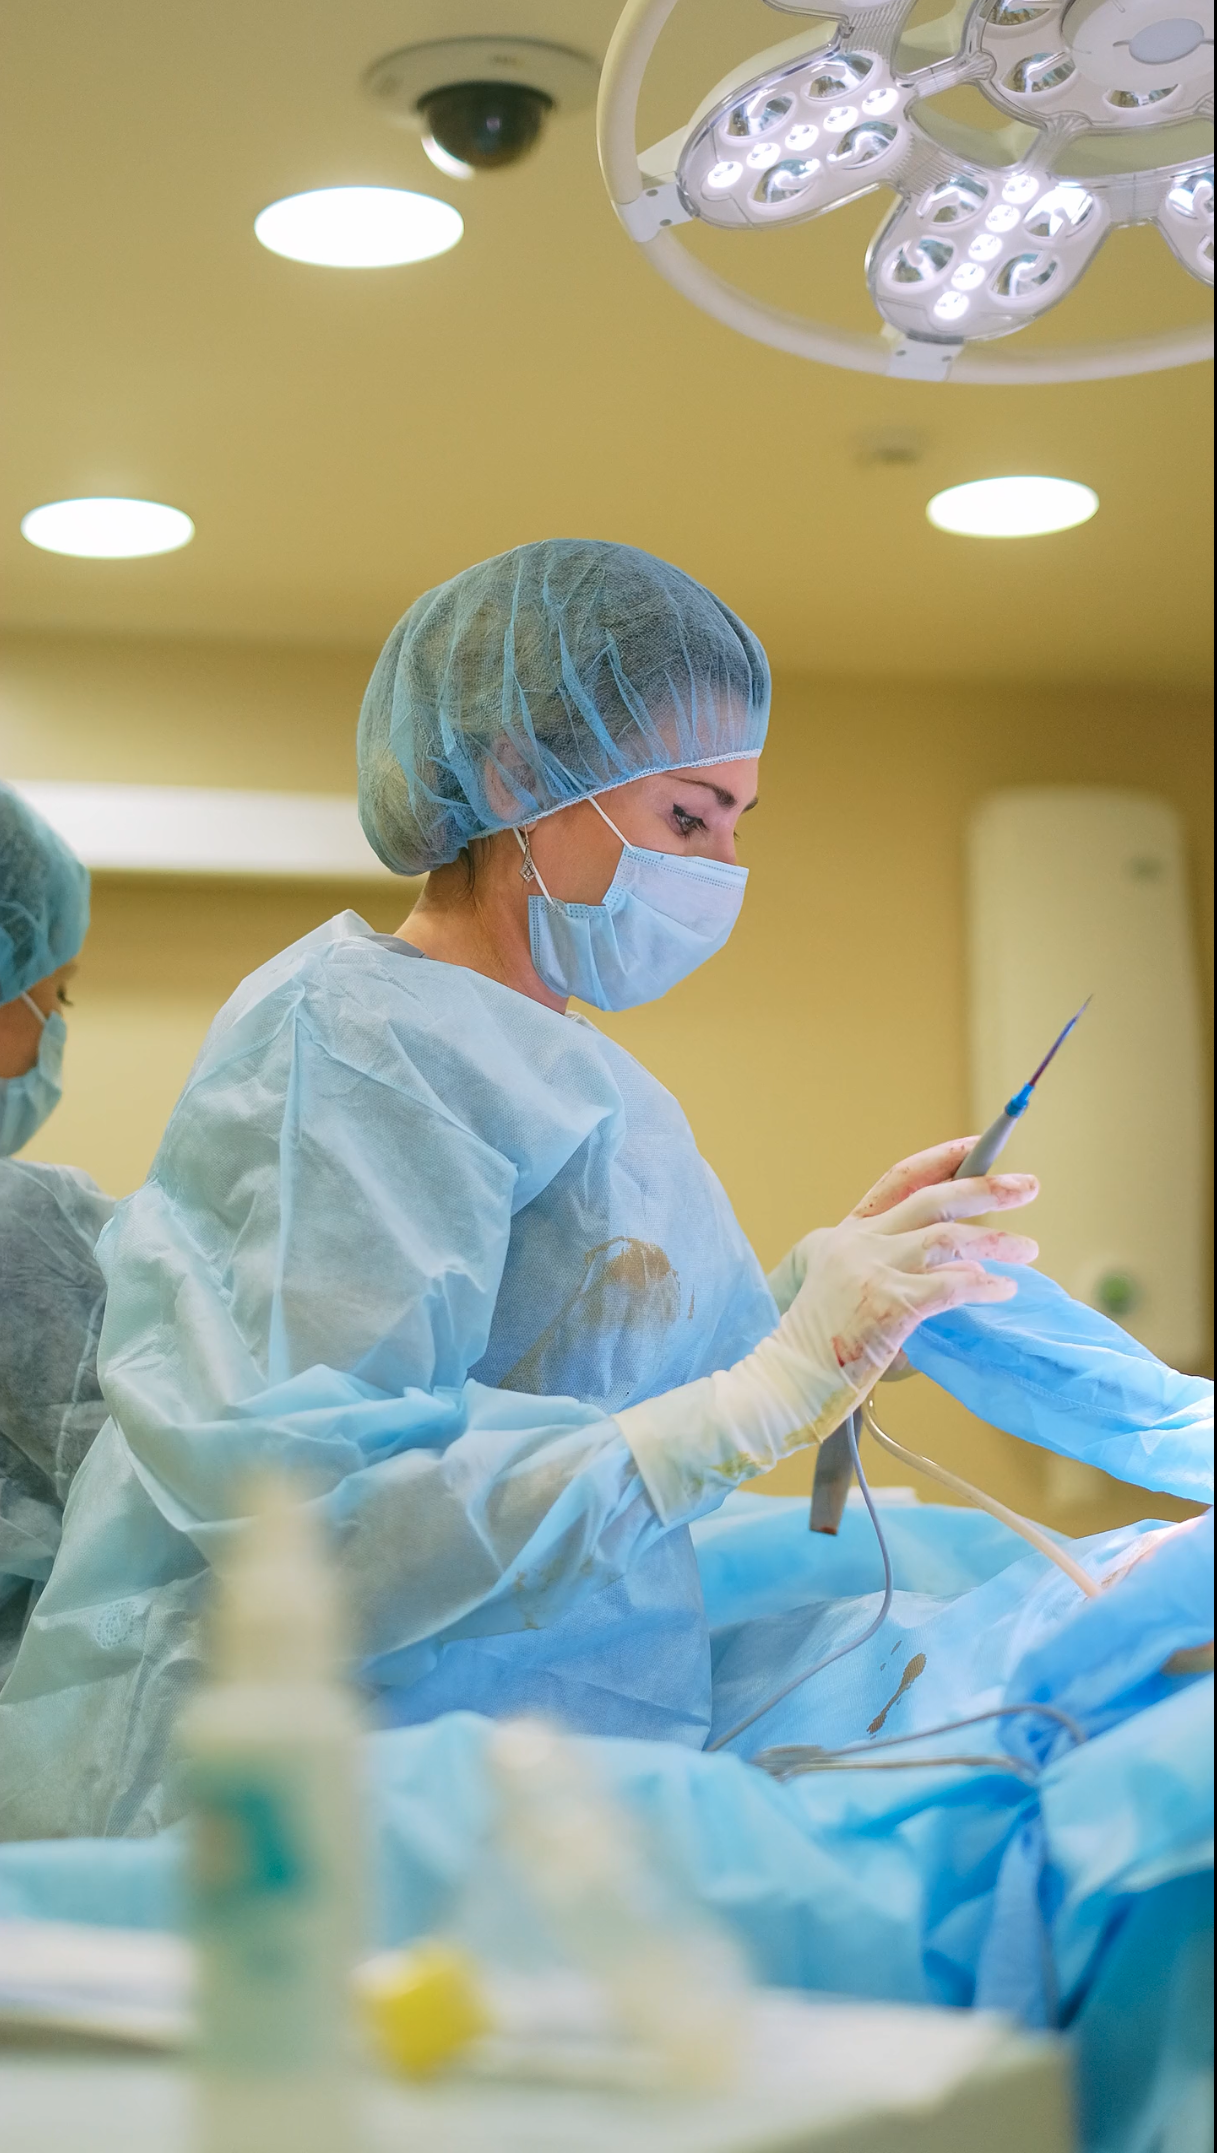 female surgeon holds medical instrument while operating